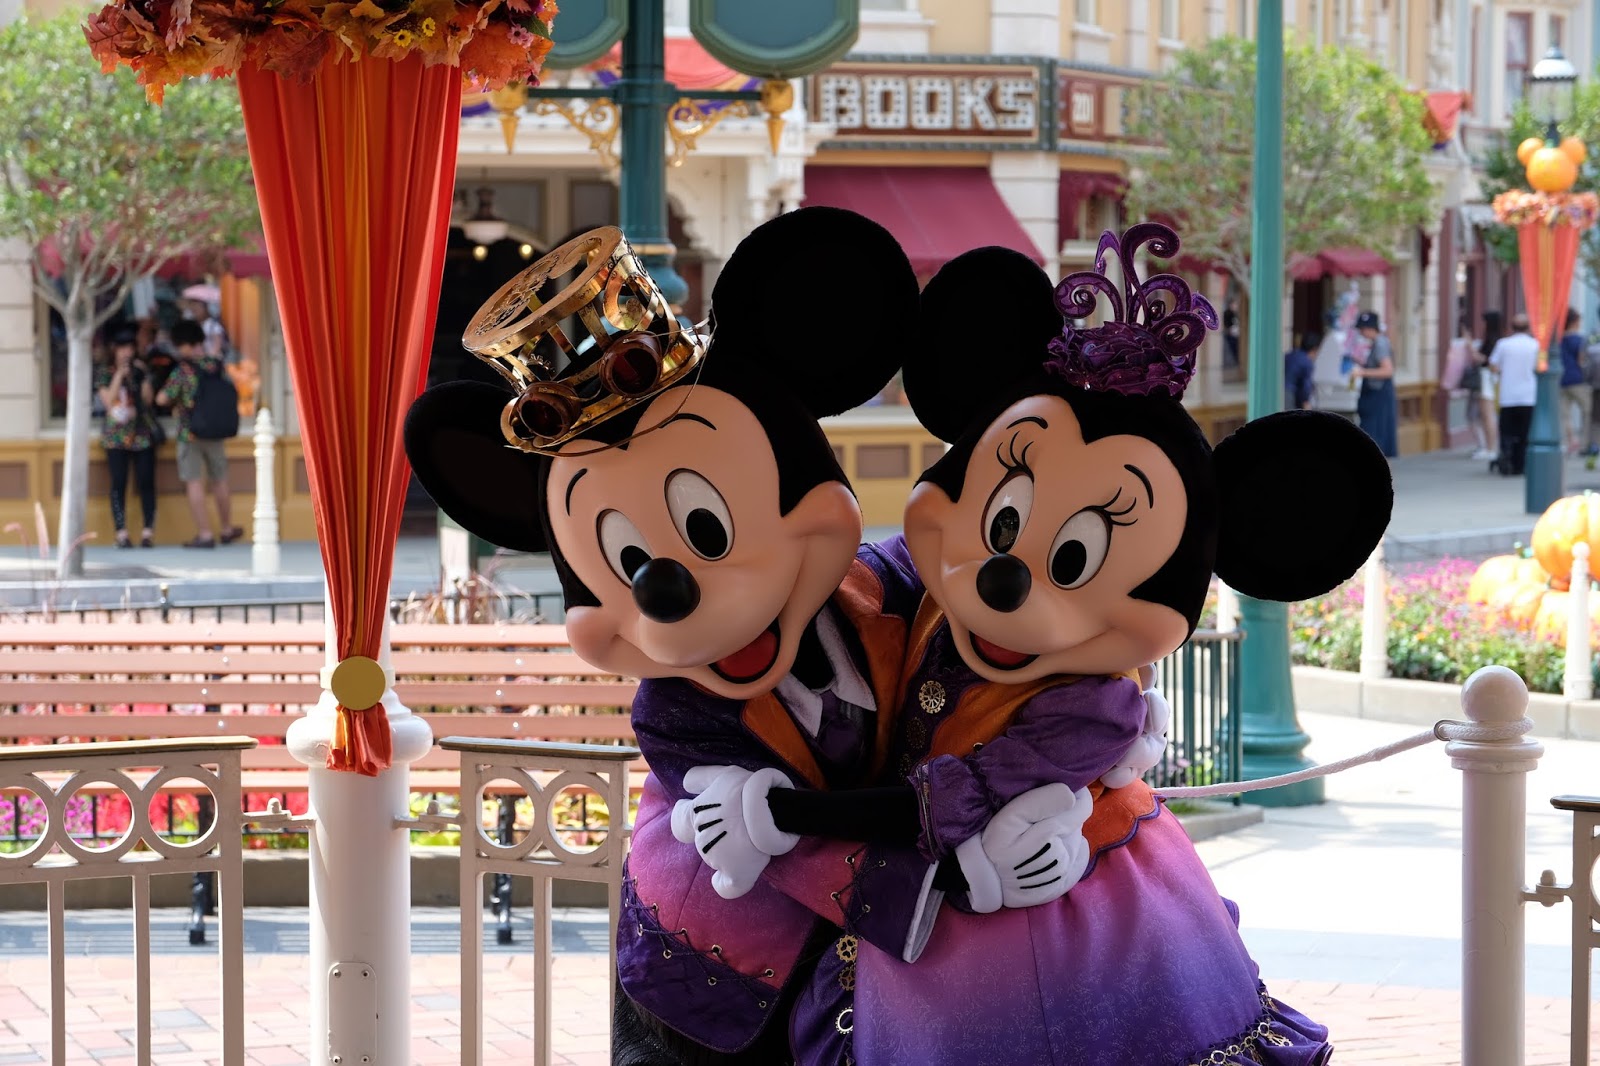 Mickey Mouse and Minnie Mouse in Halloween outfits at Hong Kong Disneyland